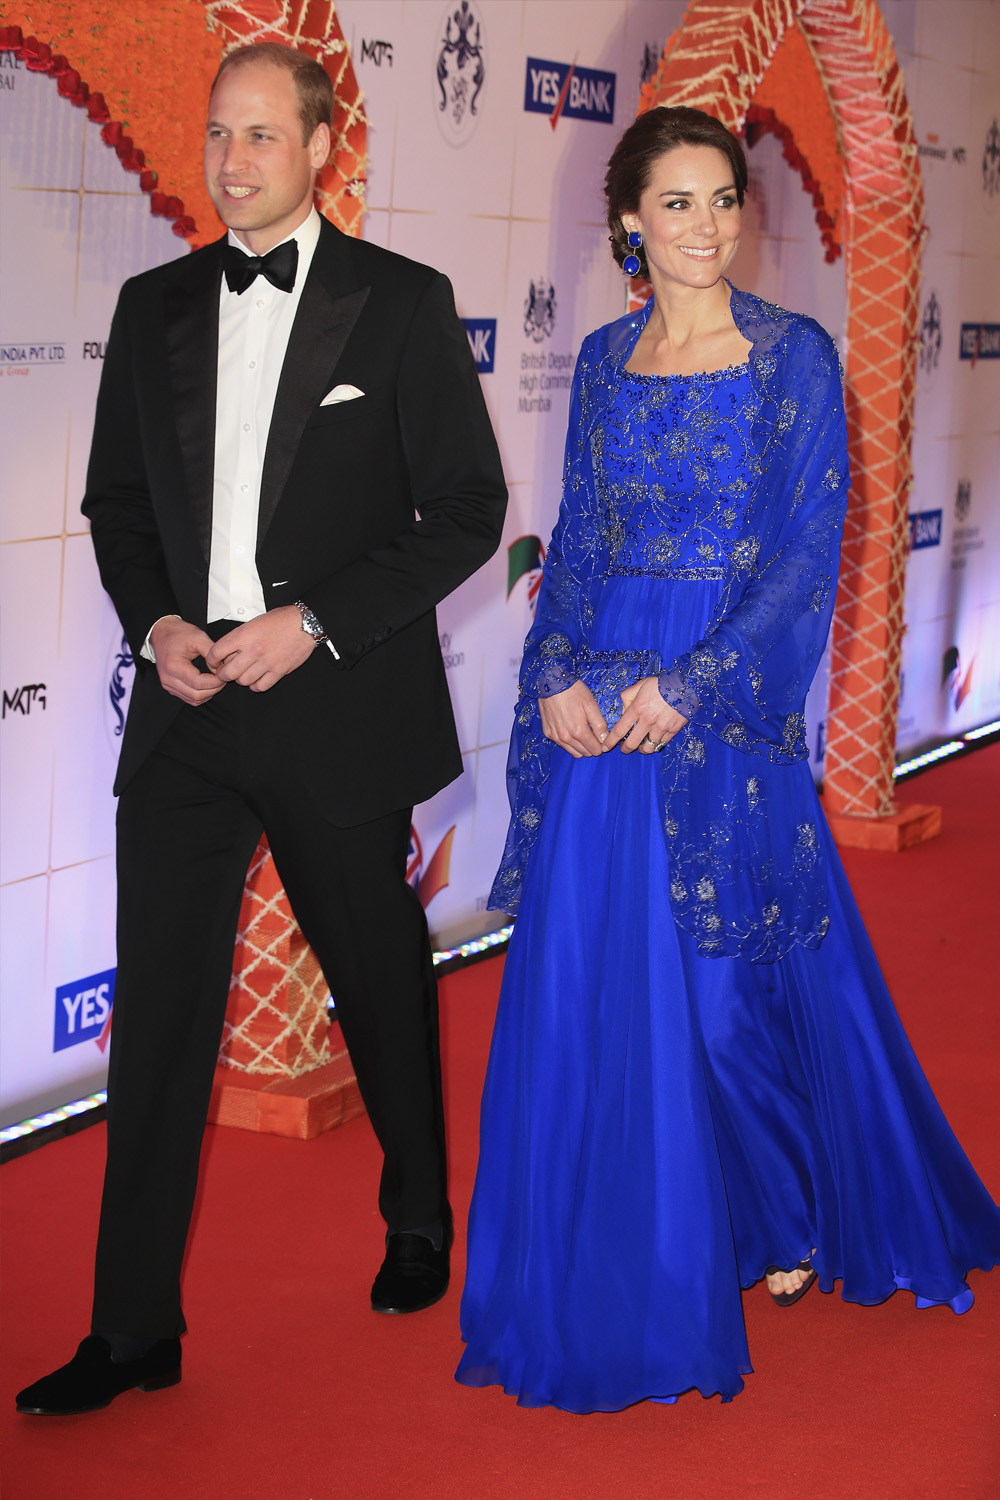 The Duchess wore a cobalt blue Jenny Packham gown inspired by India's beautiful saris at a Bollywood gala.